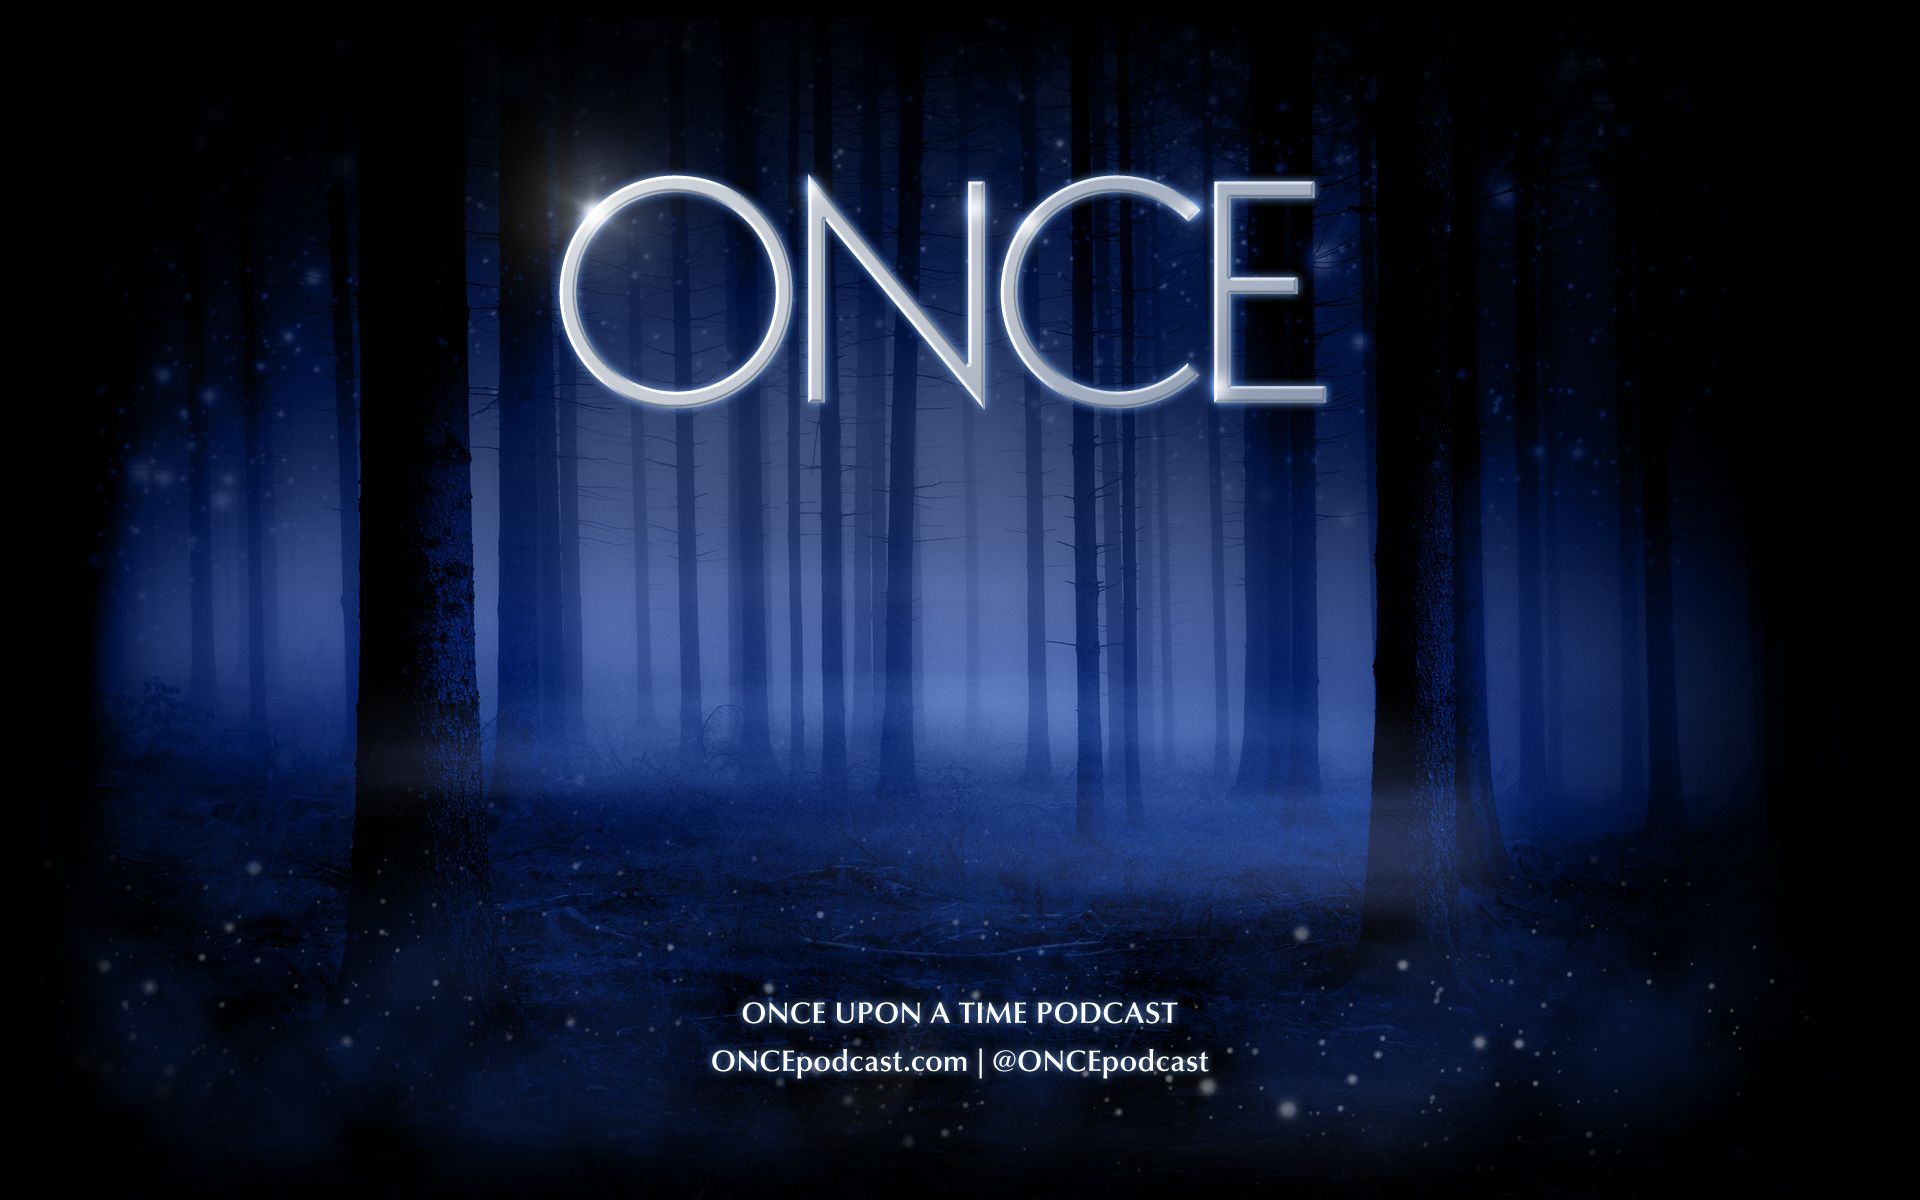 Free Once Upon a Time Podcast Desktop Wallpaper